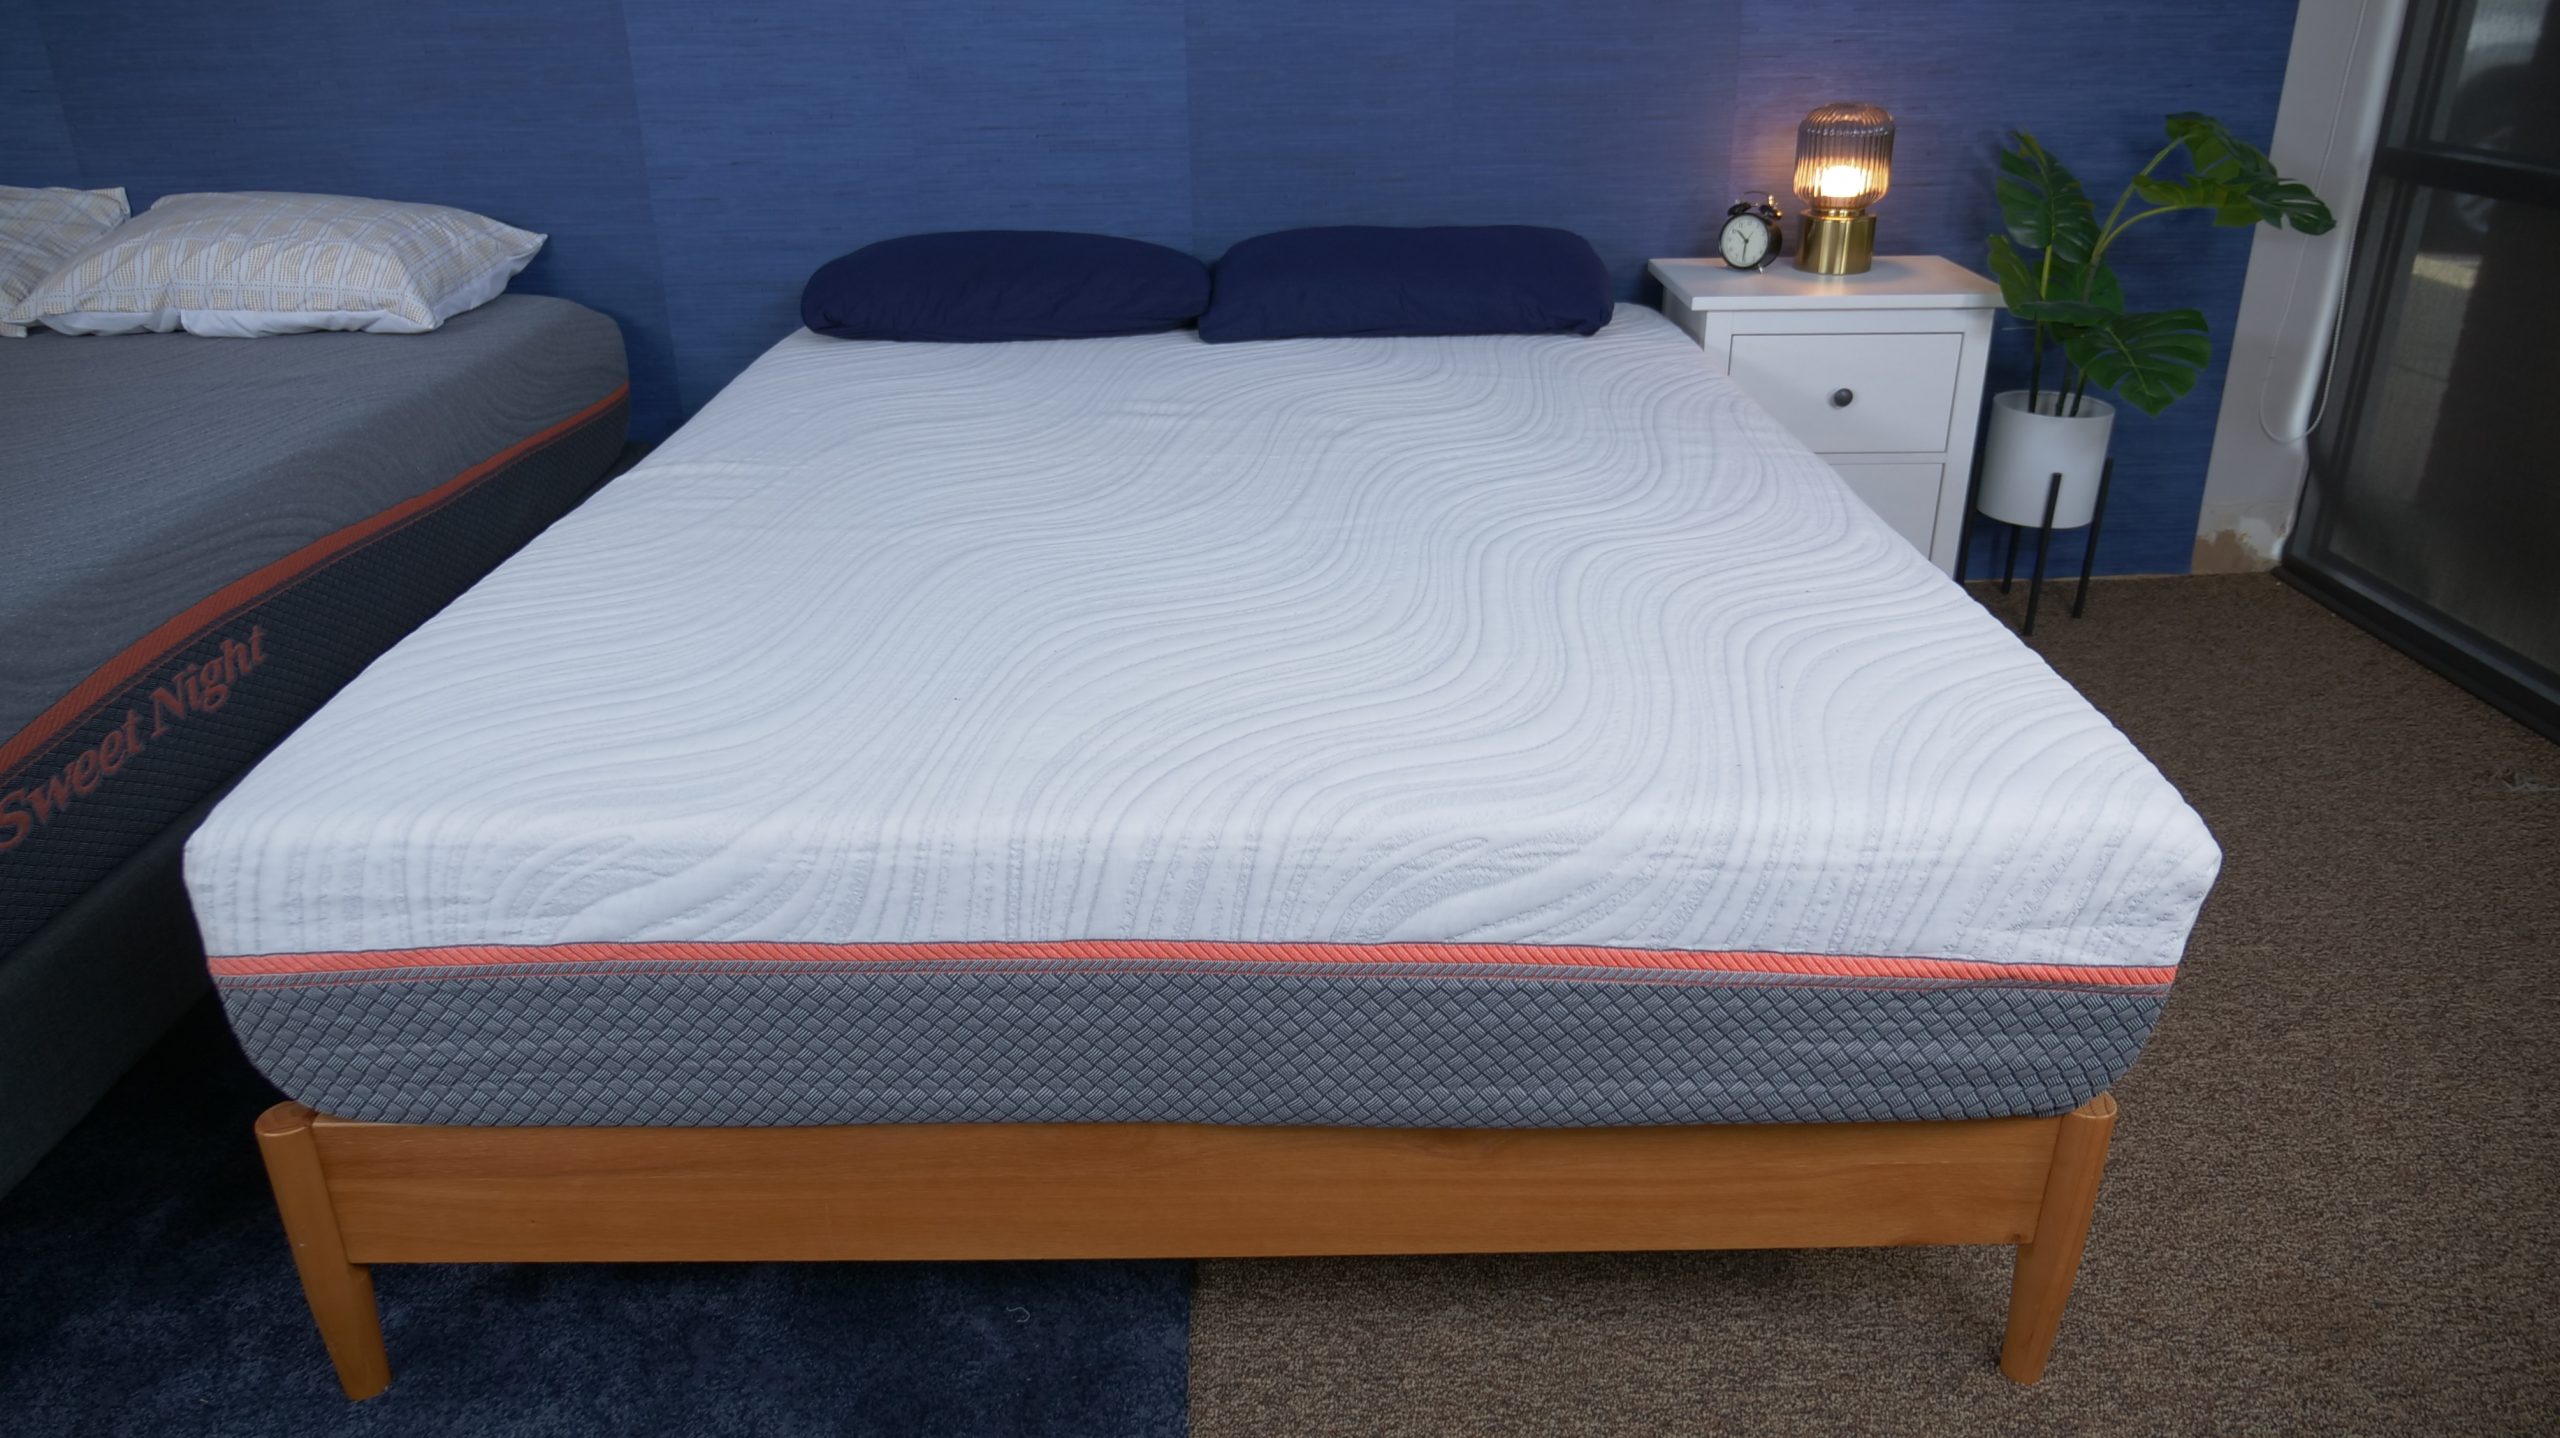 Single Mattress 3FT Individually Wrapped Pocket Springs Hybrid Mattress with Gel Memory Foam for Motion Isolation & Cooler Sleep 90x190x20cm Sweetnight 8 Inch Memory Foam Sprung Mattress Single 